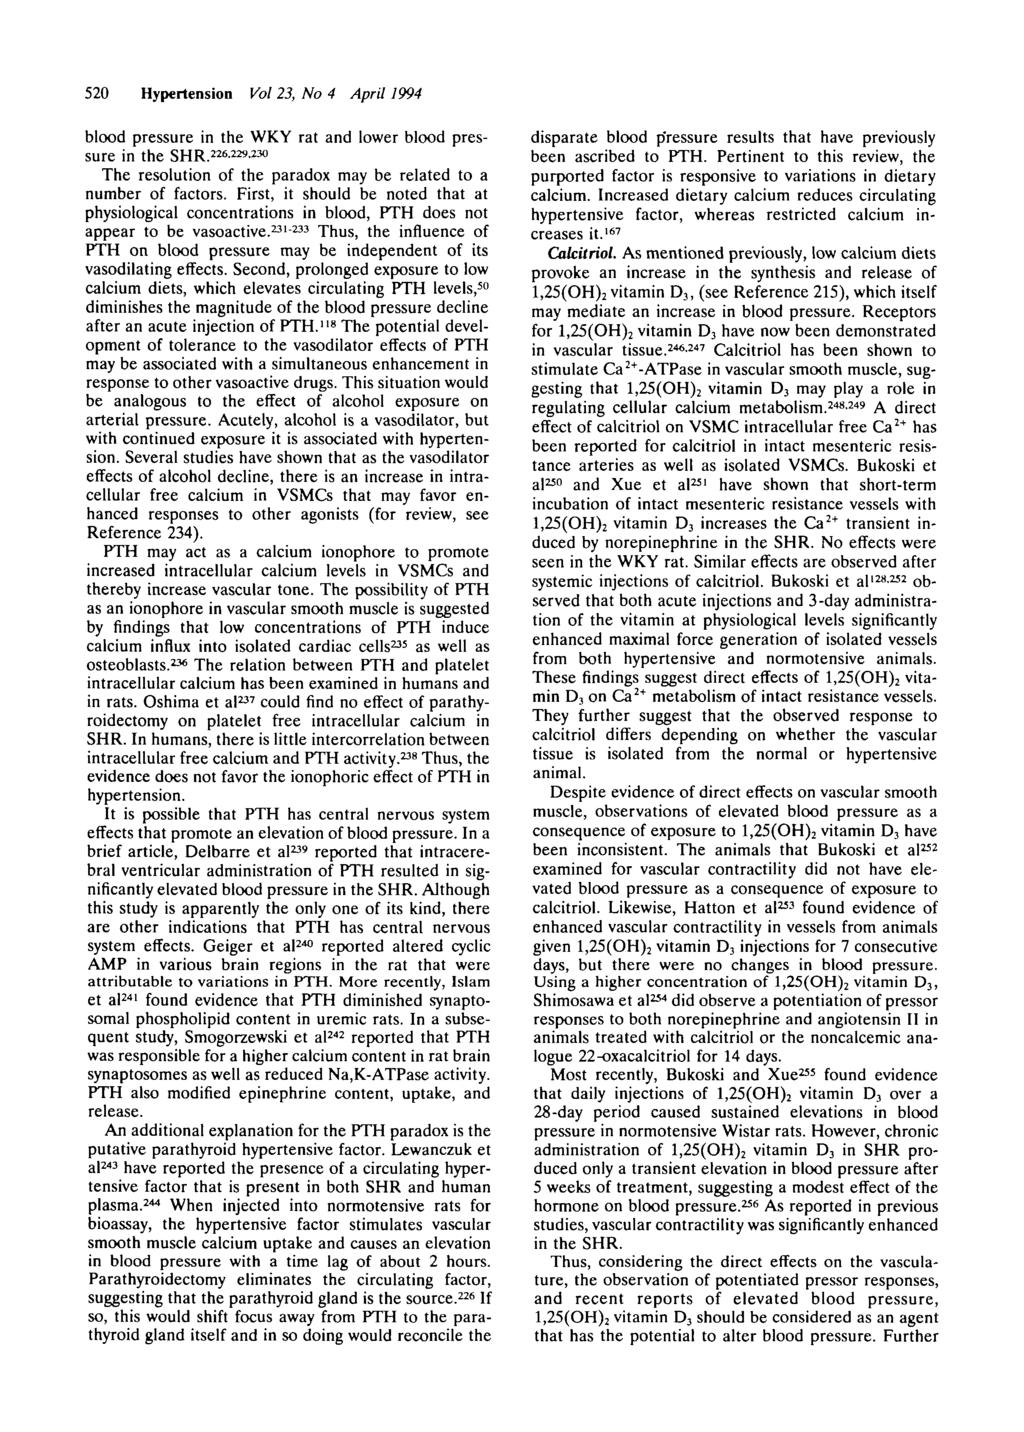 520 Hypertension Vol 23, No 4 April 1994 blood pressure in the WKY rat and lower blood pressure in the SHR. 226-229 - 230 The resolution of the paradox may be related to a number of factors.